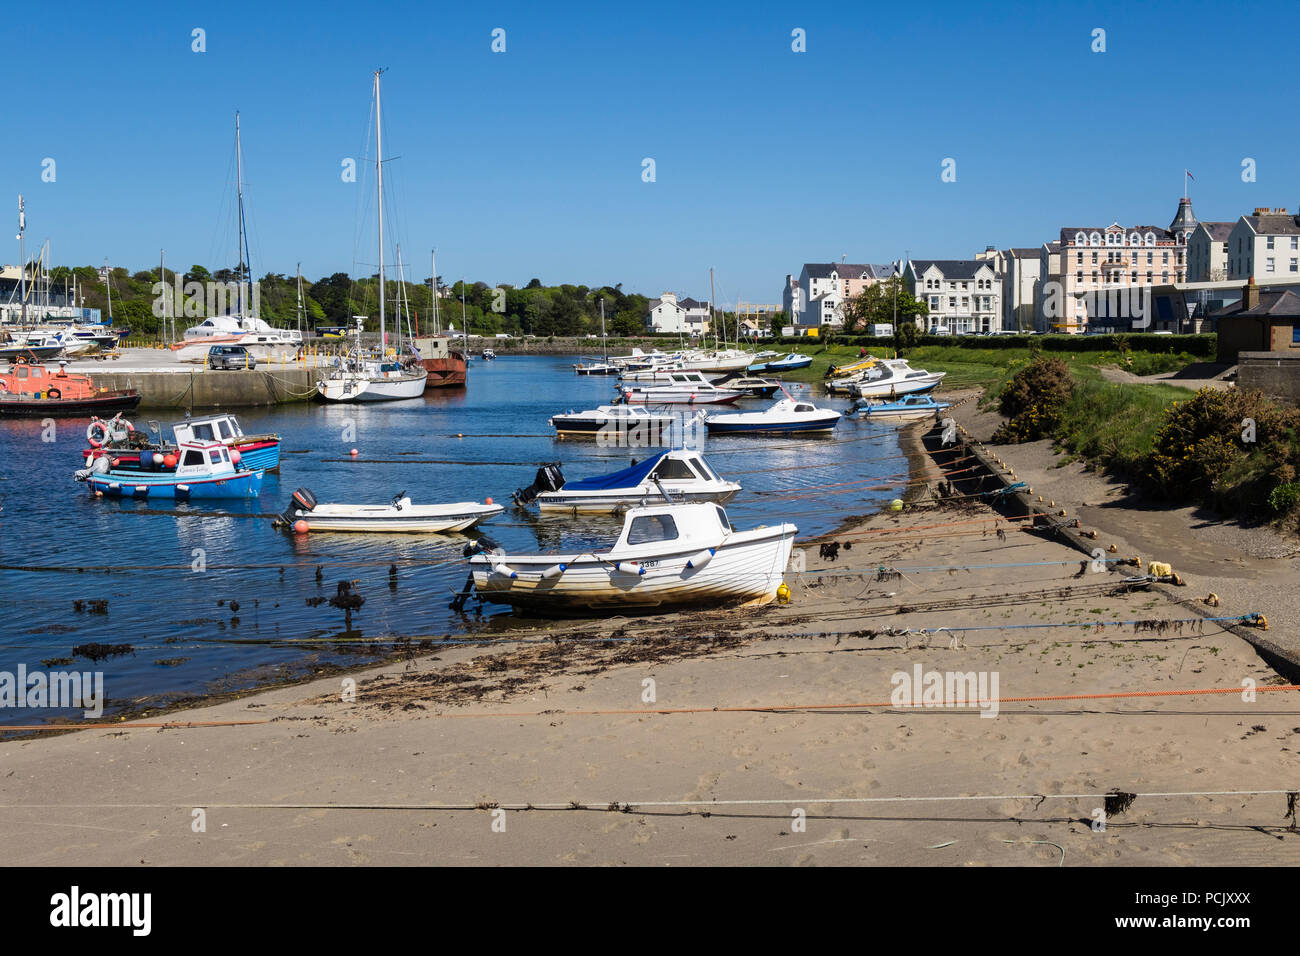 Small boats moored in the inner harbour on Sulby River. Ramsey, Isle of Man, British Isles Stock Photo